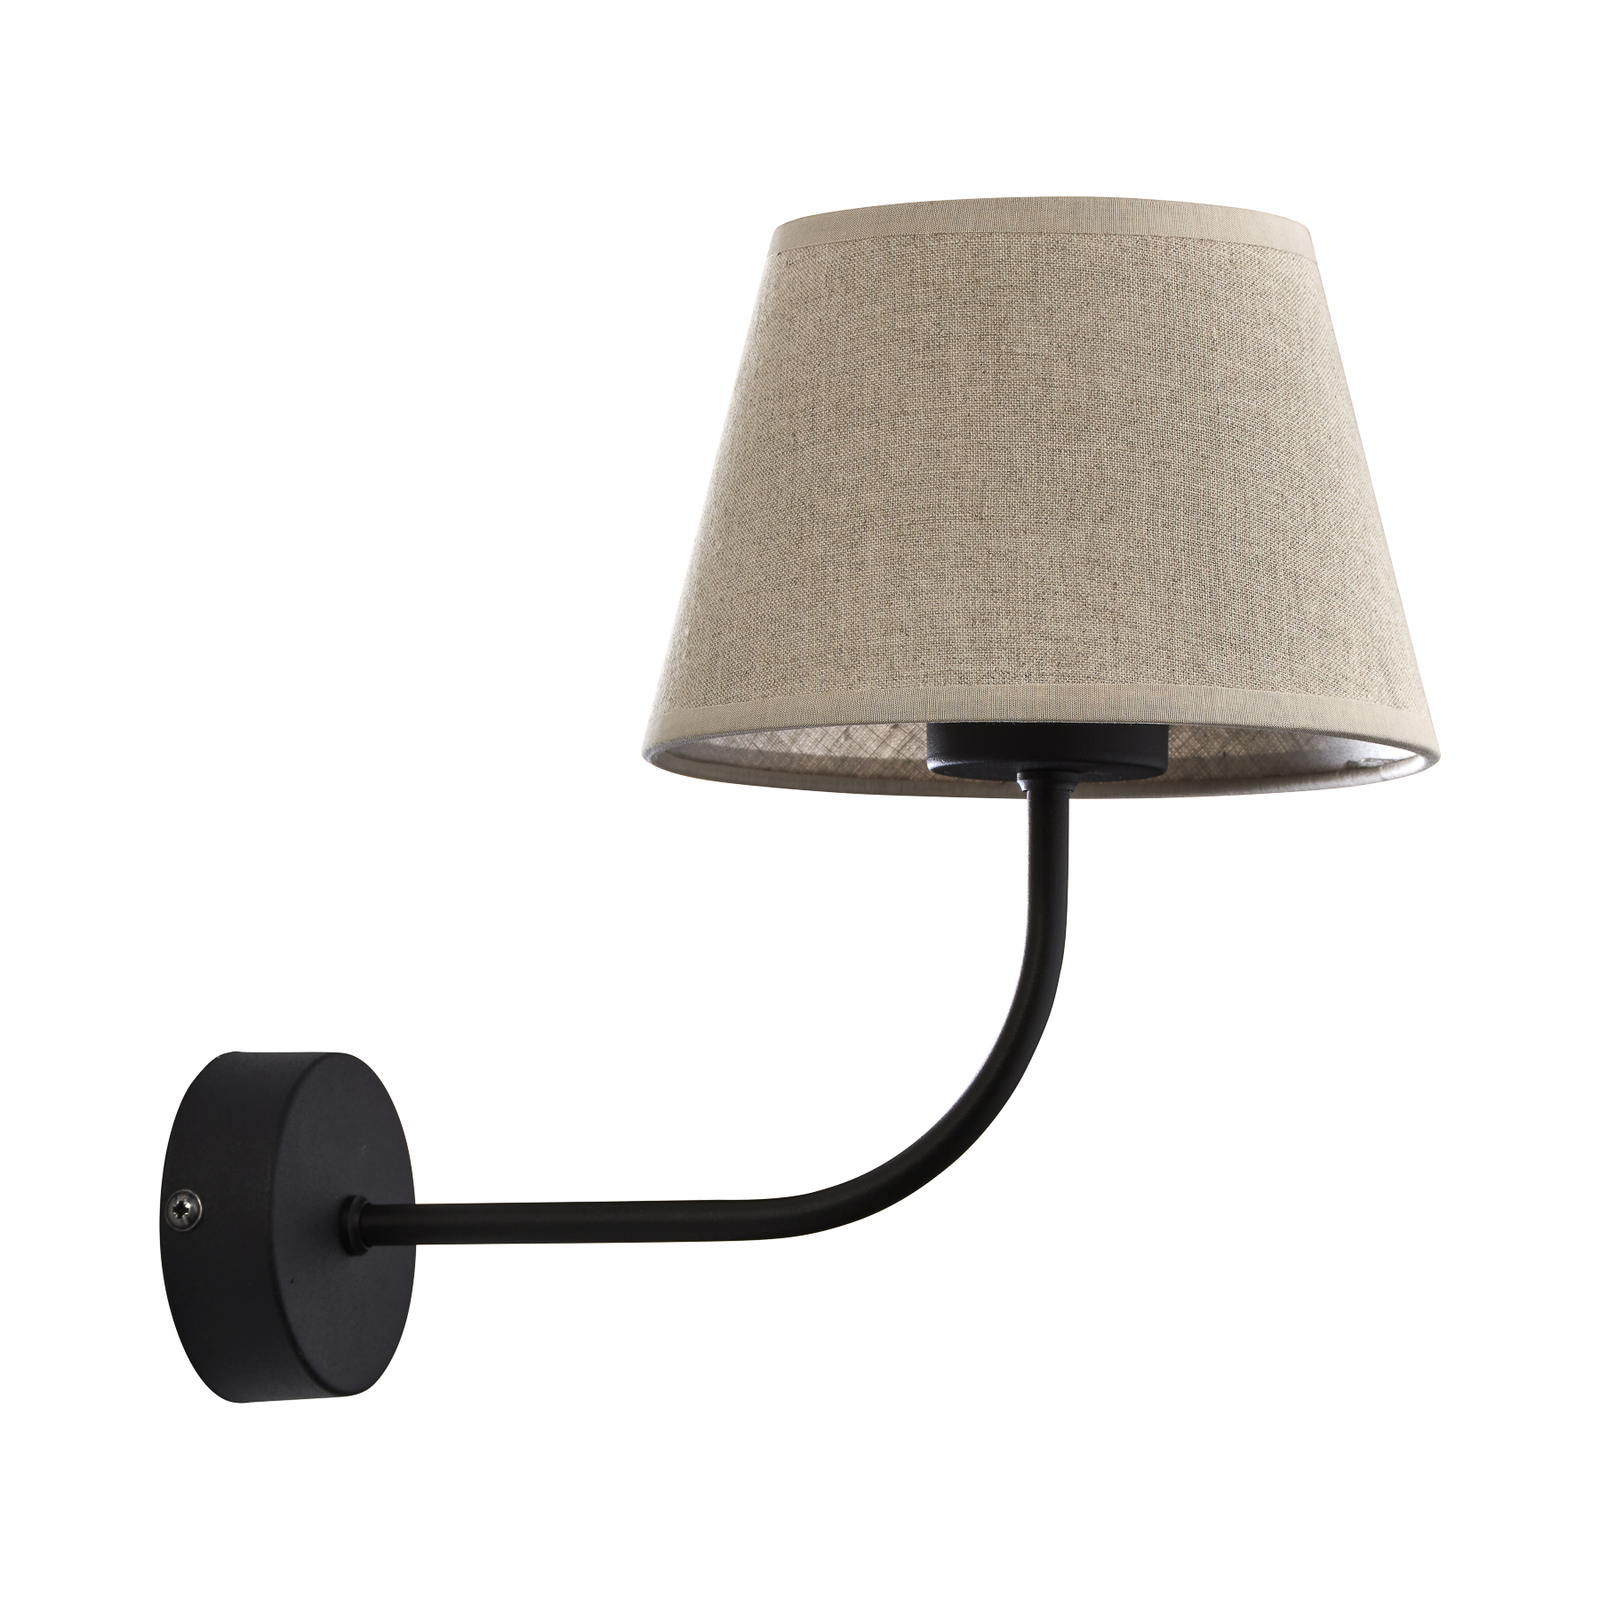 Chicago wall light with a linen lampshade